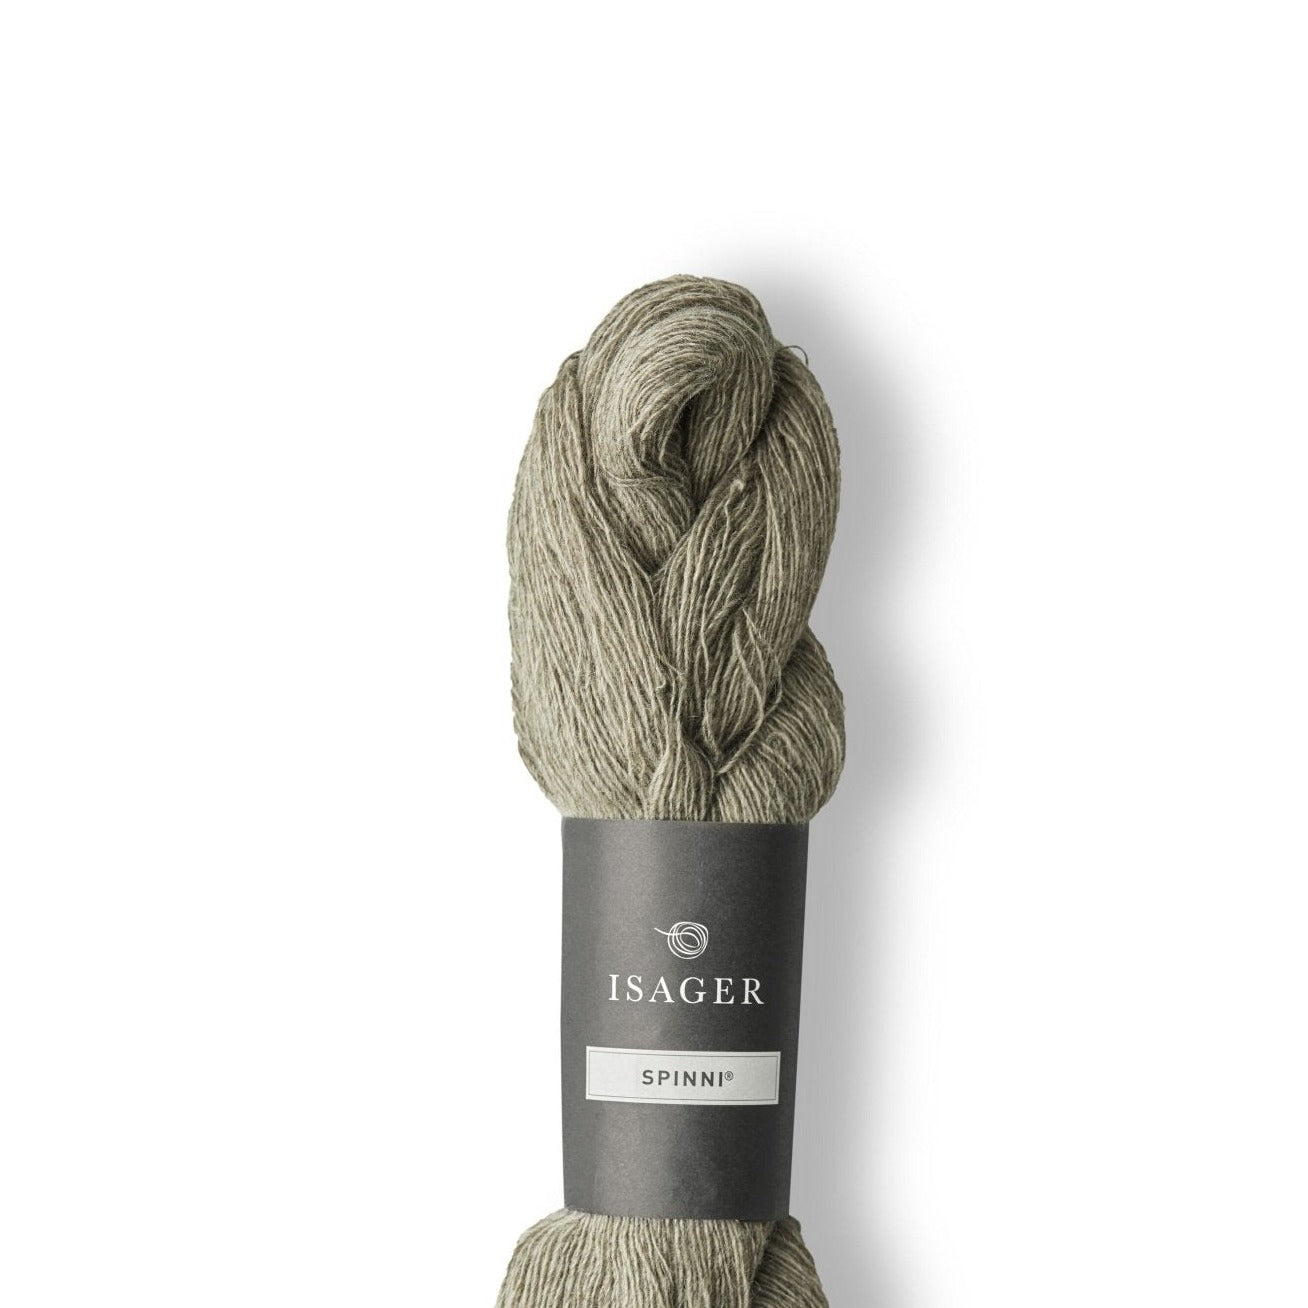 Isager Spinni - 13s - 2 Ply - Isager - The Little Yarn Store